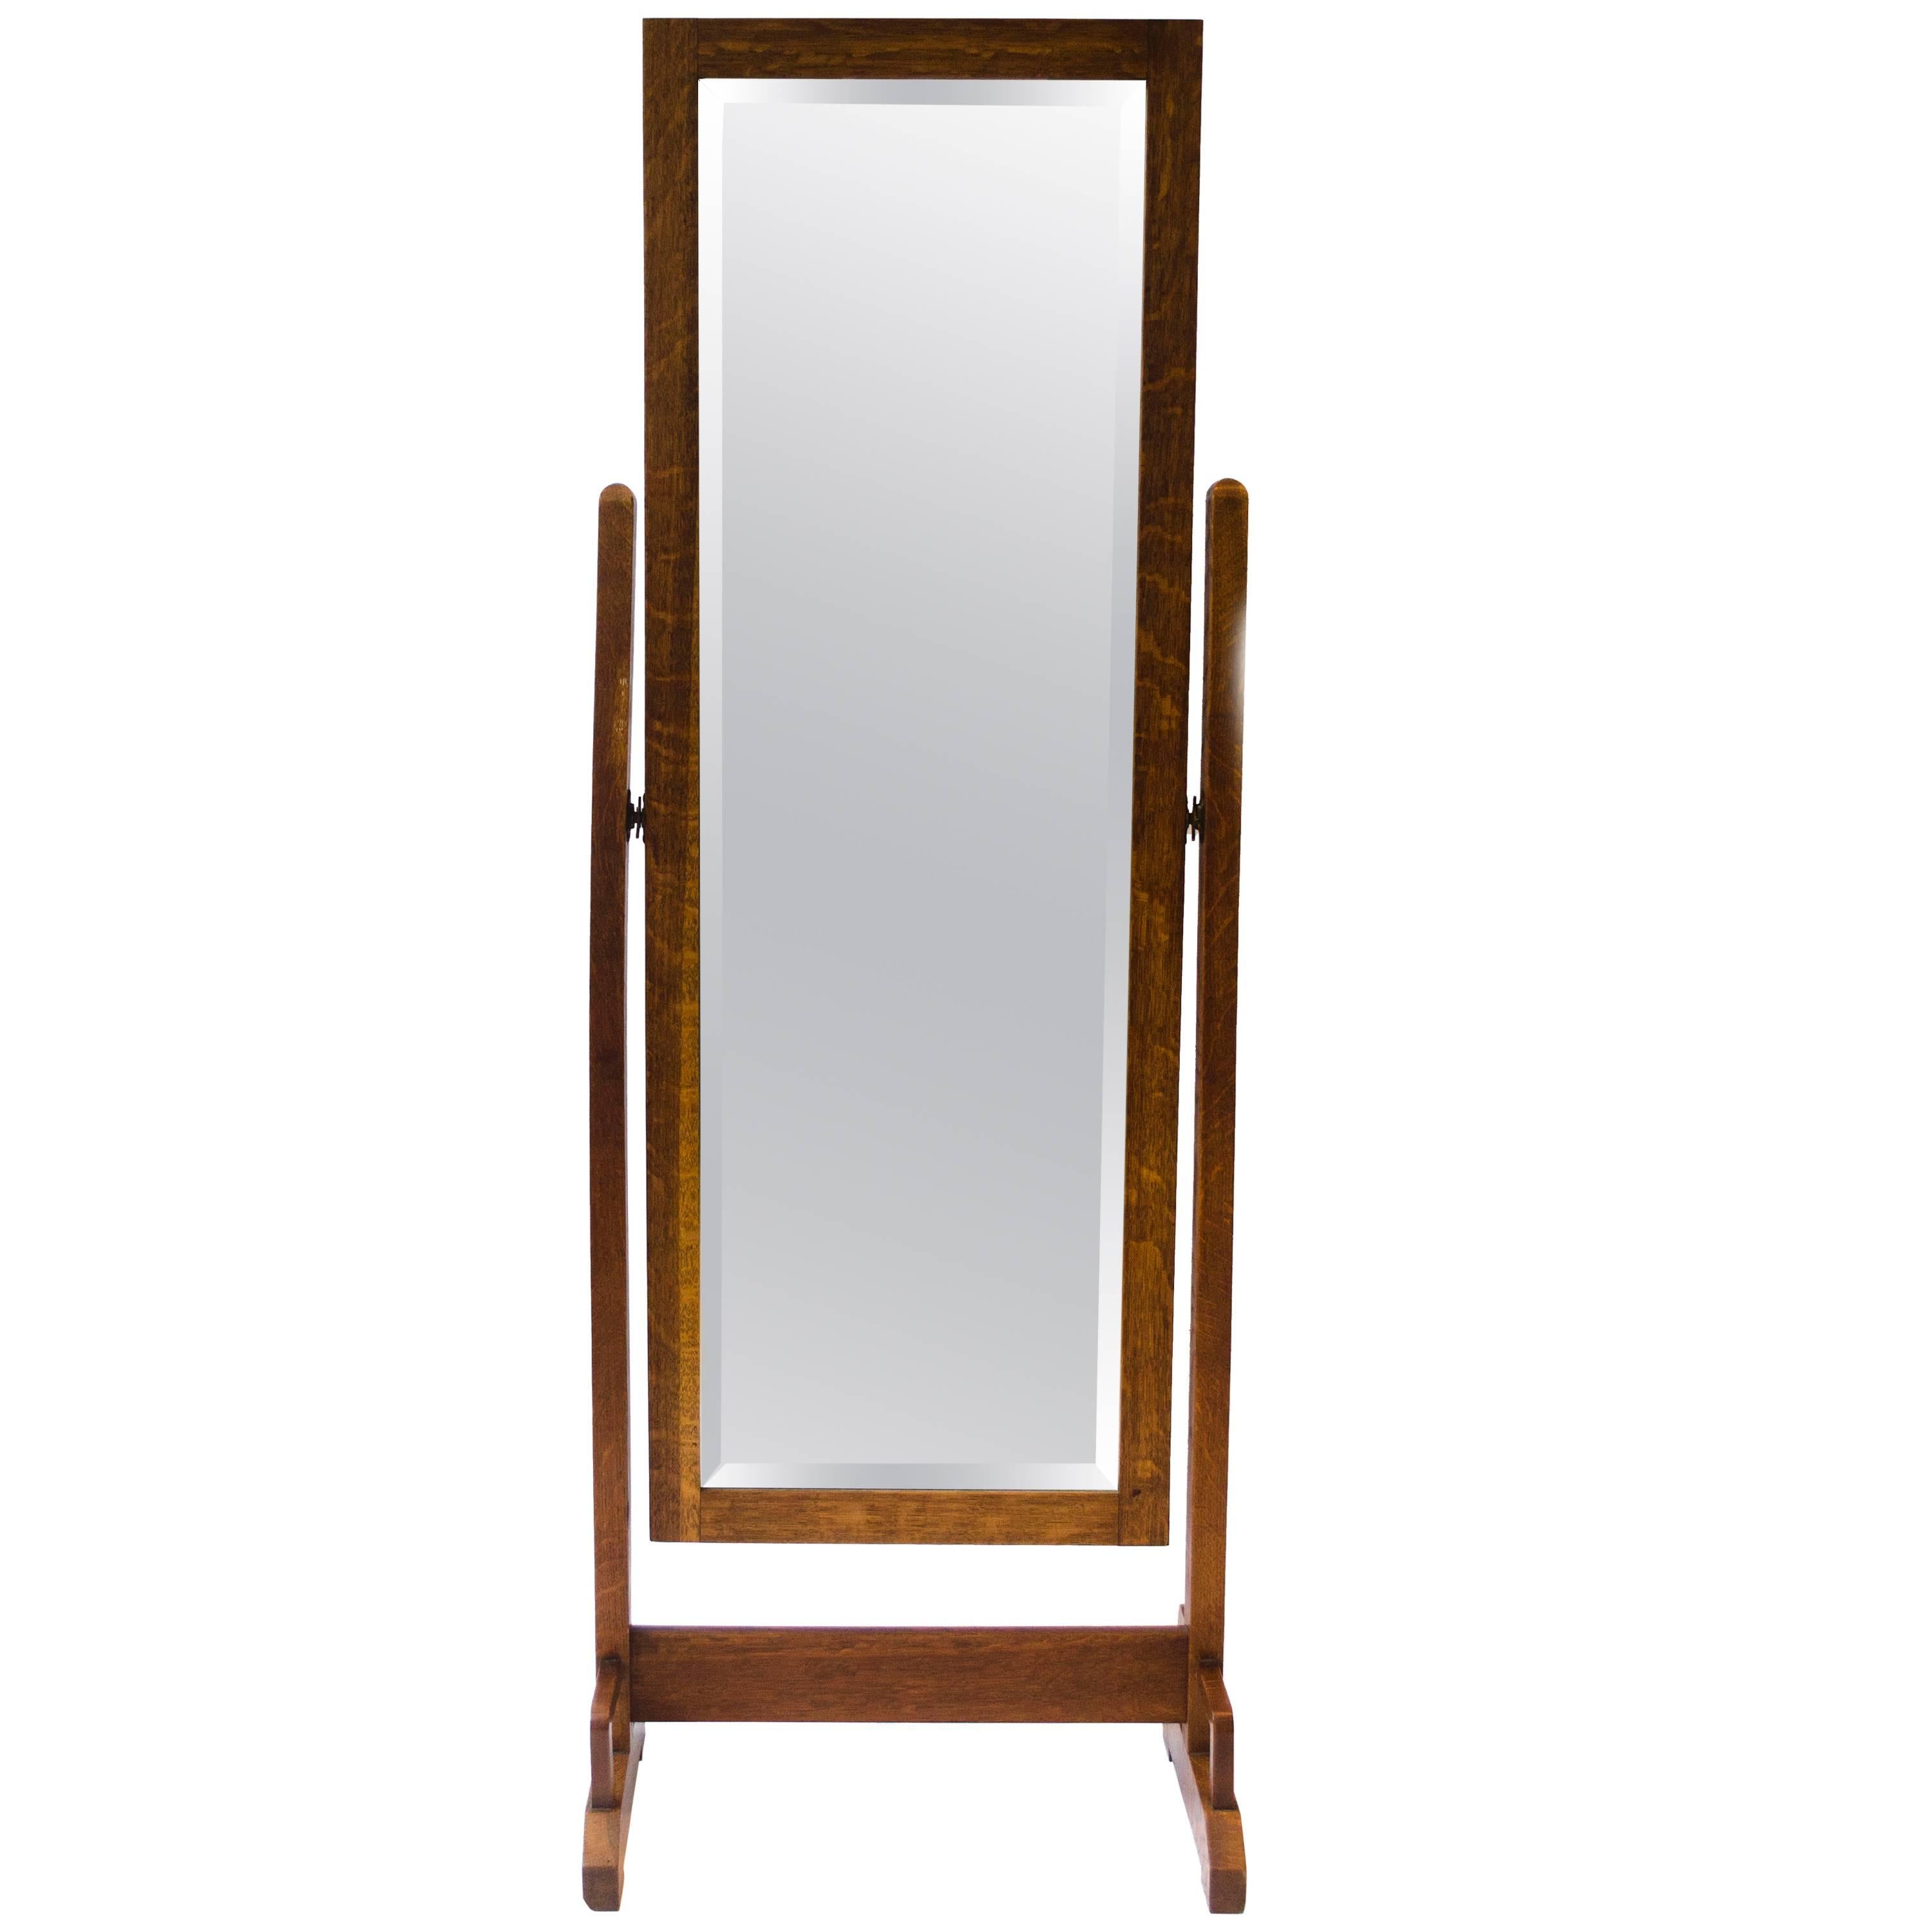 Anglo-Japanese Mirror attributed to E W Godwin